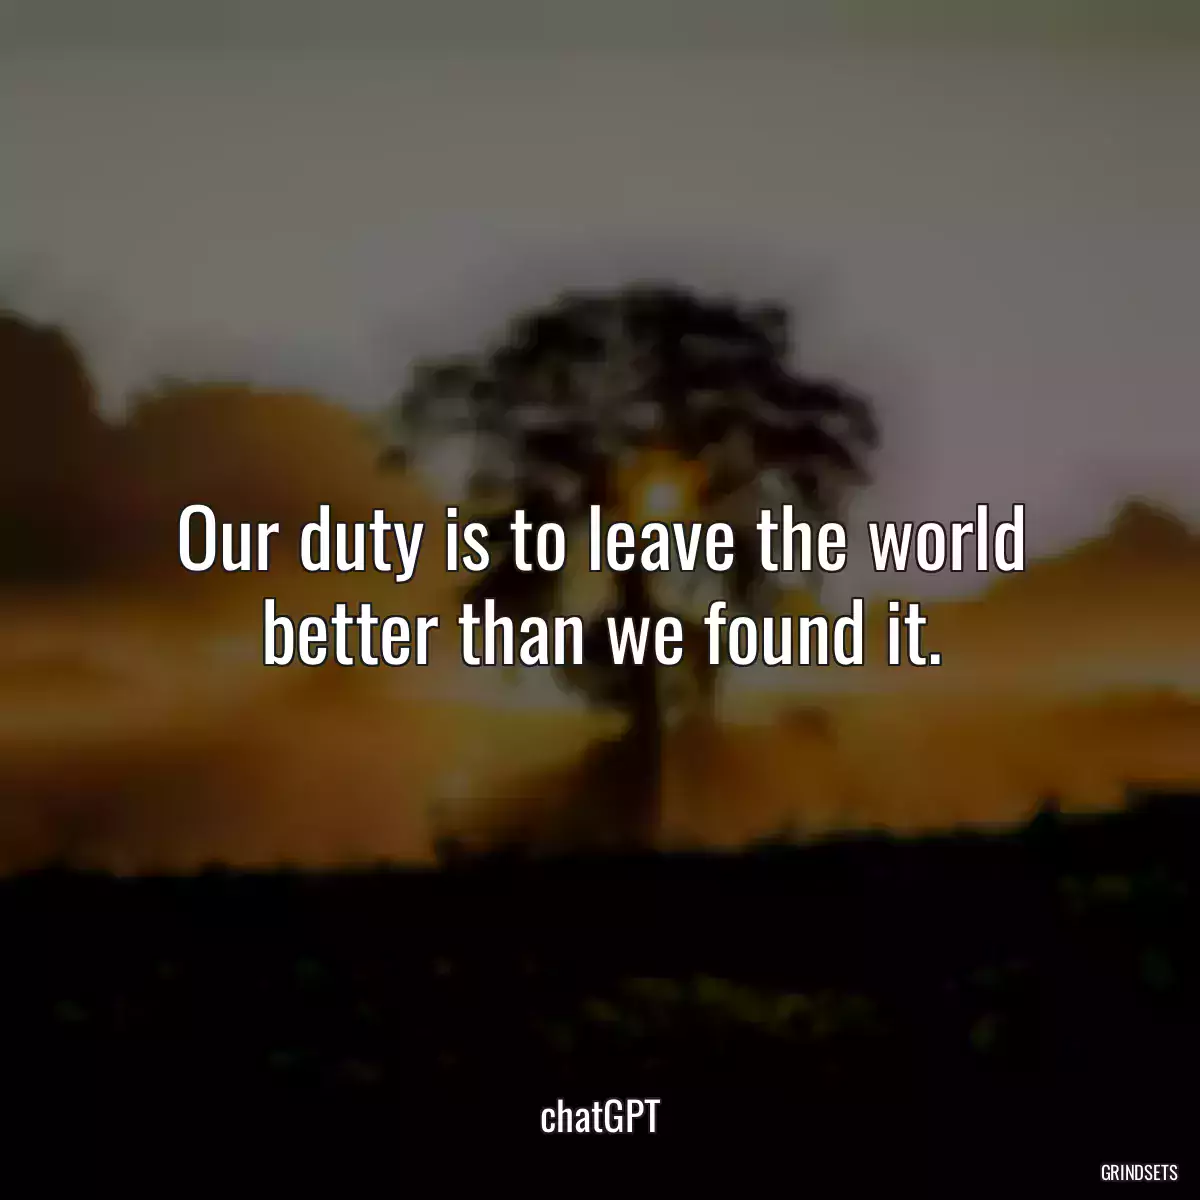 Our duty is to leave the world better than we found it.